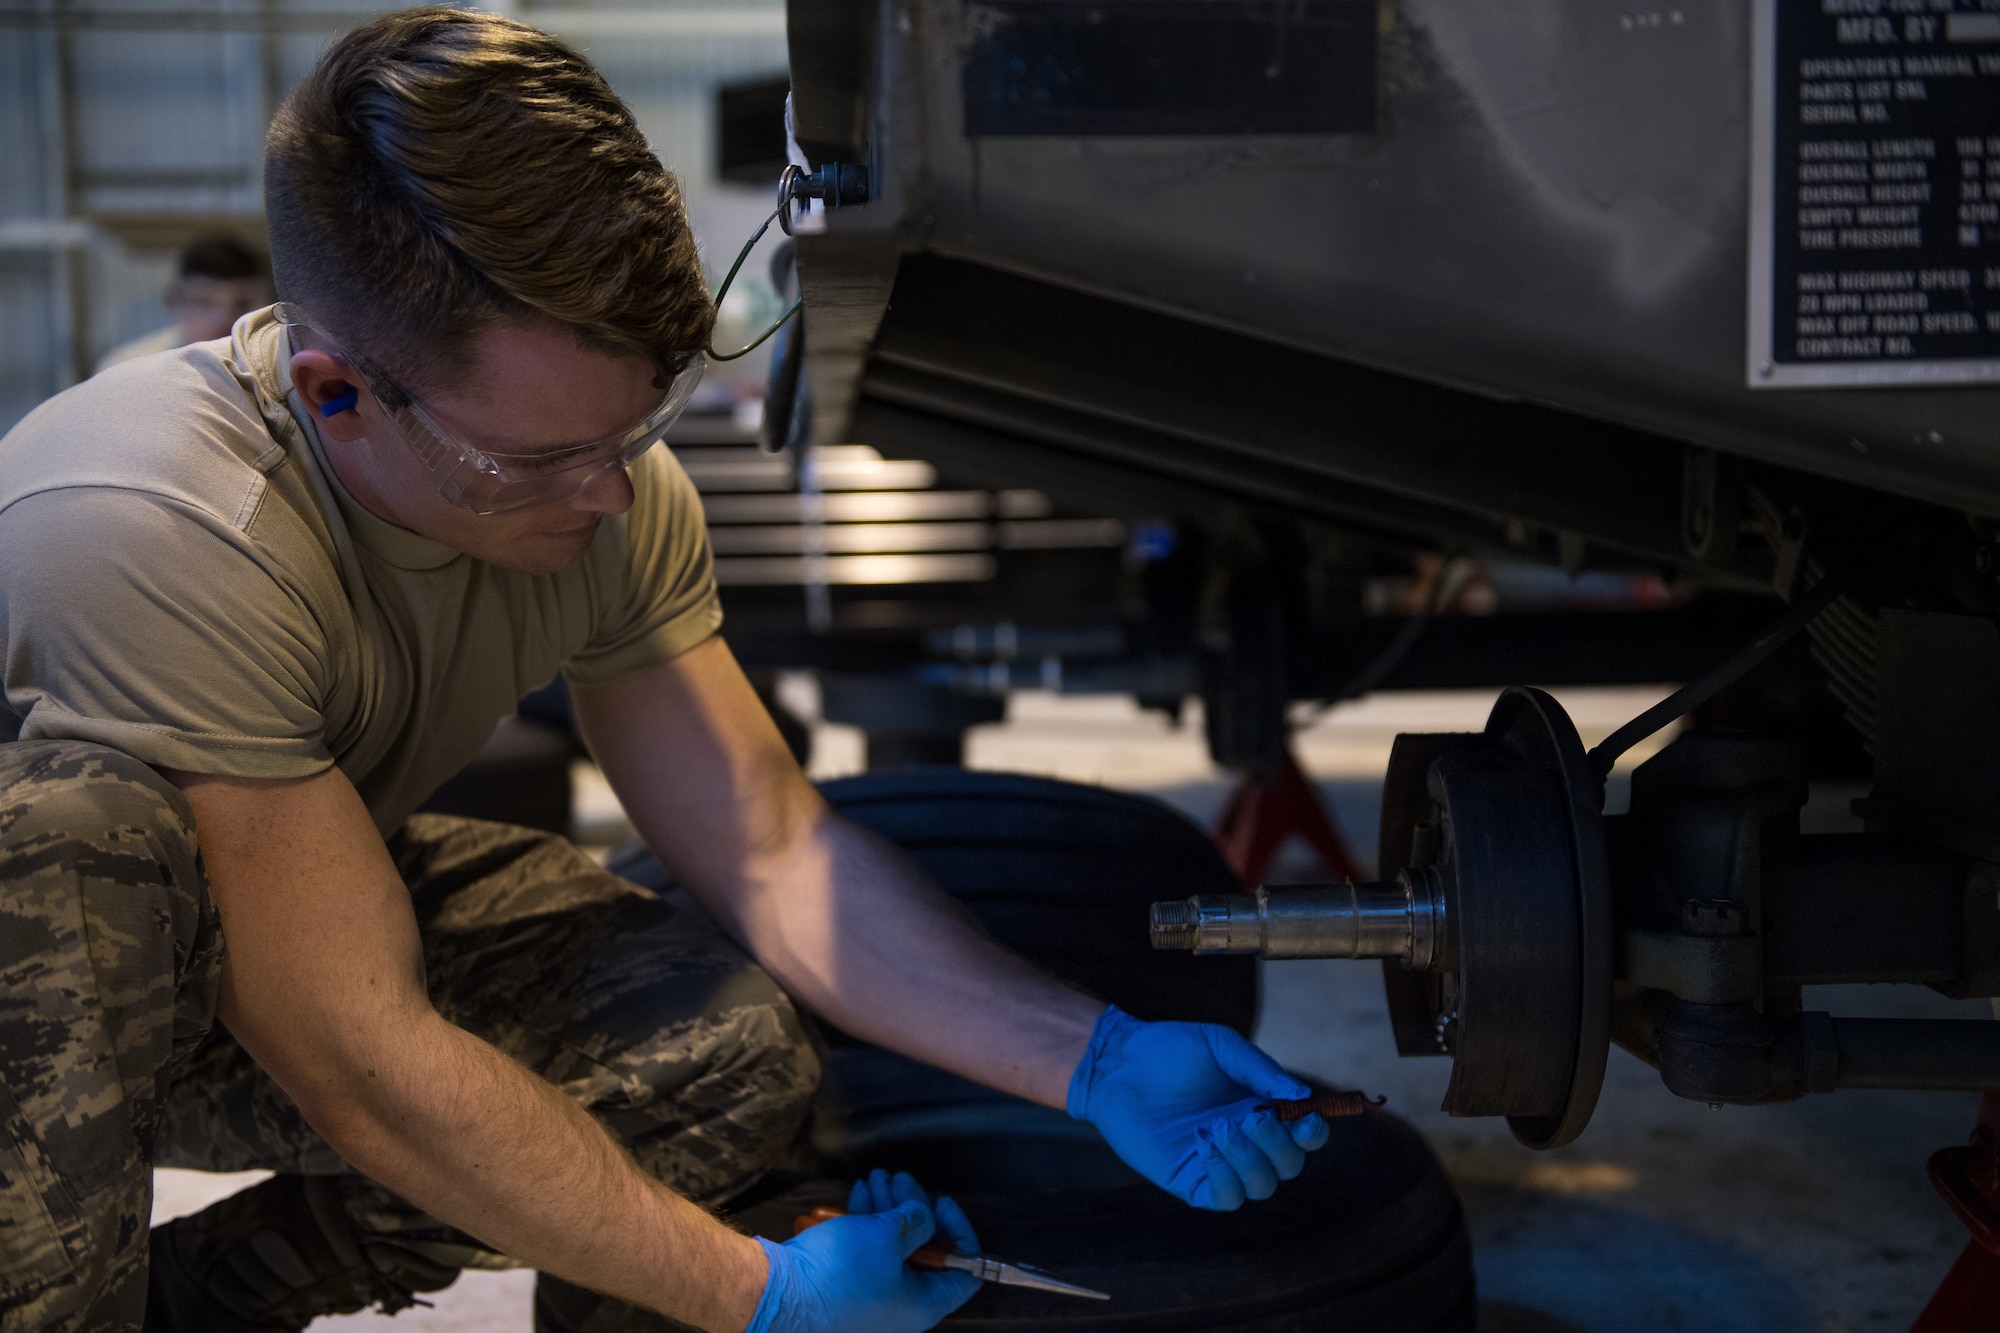 Airman 1st Class Jerrick Worley, 2nd Munitions Squadron munitions systems equipment maintenance crew chief, replaces a spring on a MHU-110 munitions trailer at RAF Fairford, England, April 2, 2019. Fairford has more than 35 munitions trailers on base and 2nd MUNS Airmen have been able to return more than 15 of them to serviceability. (U.S. Air Force photo by Airman 1st Class Tessa B. Corrick)